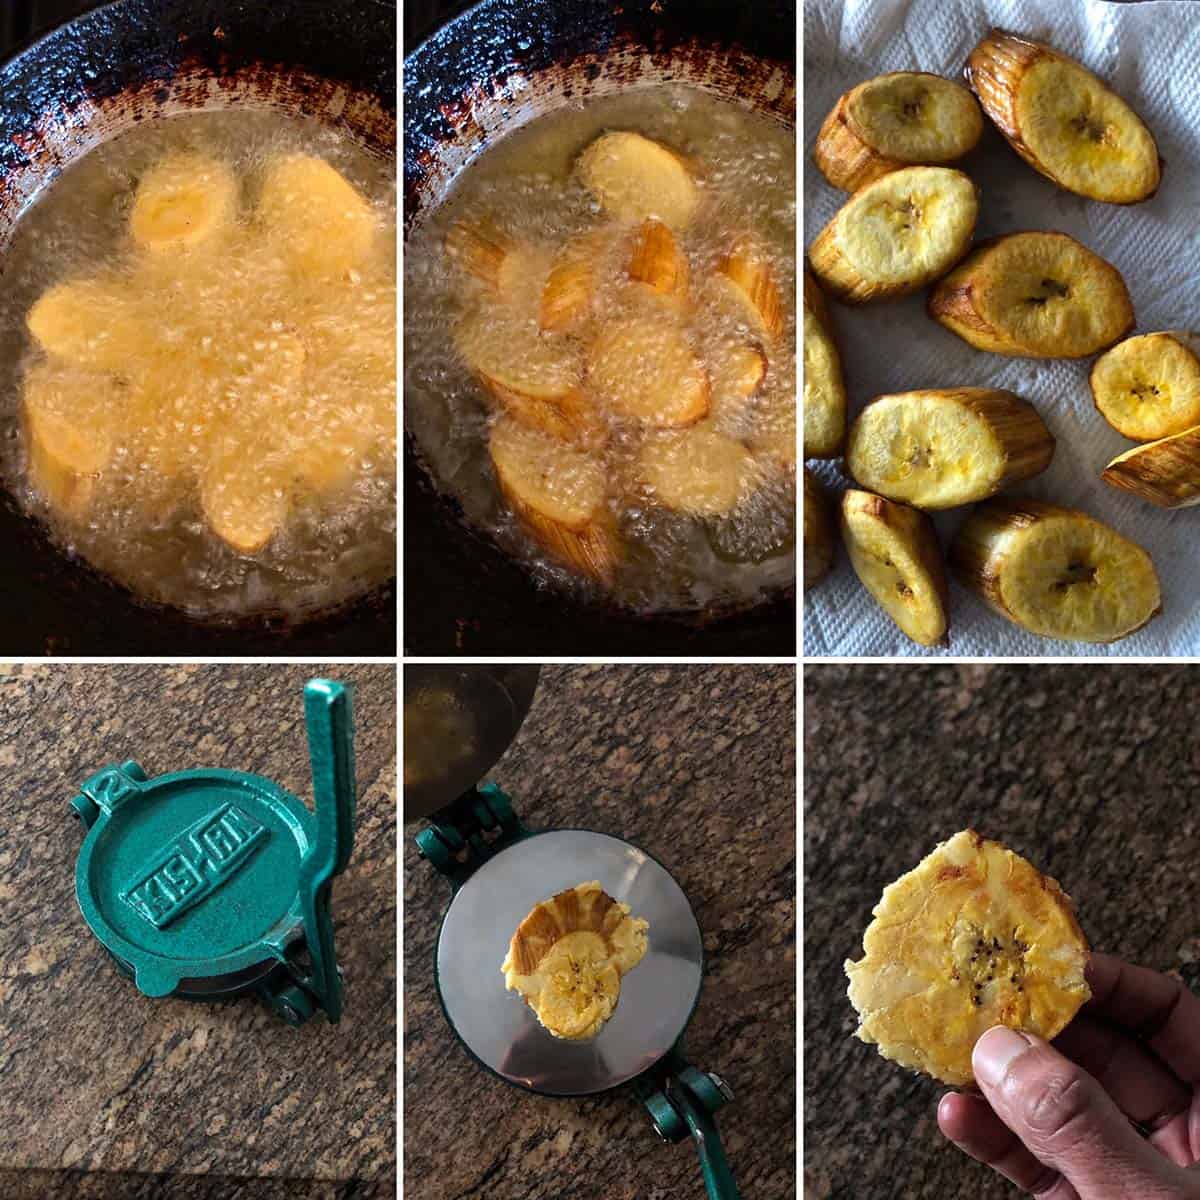 Step by step photos showing the double frying of plantains